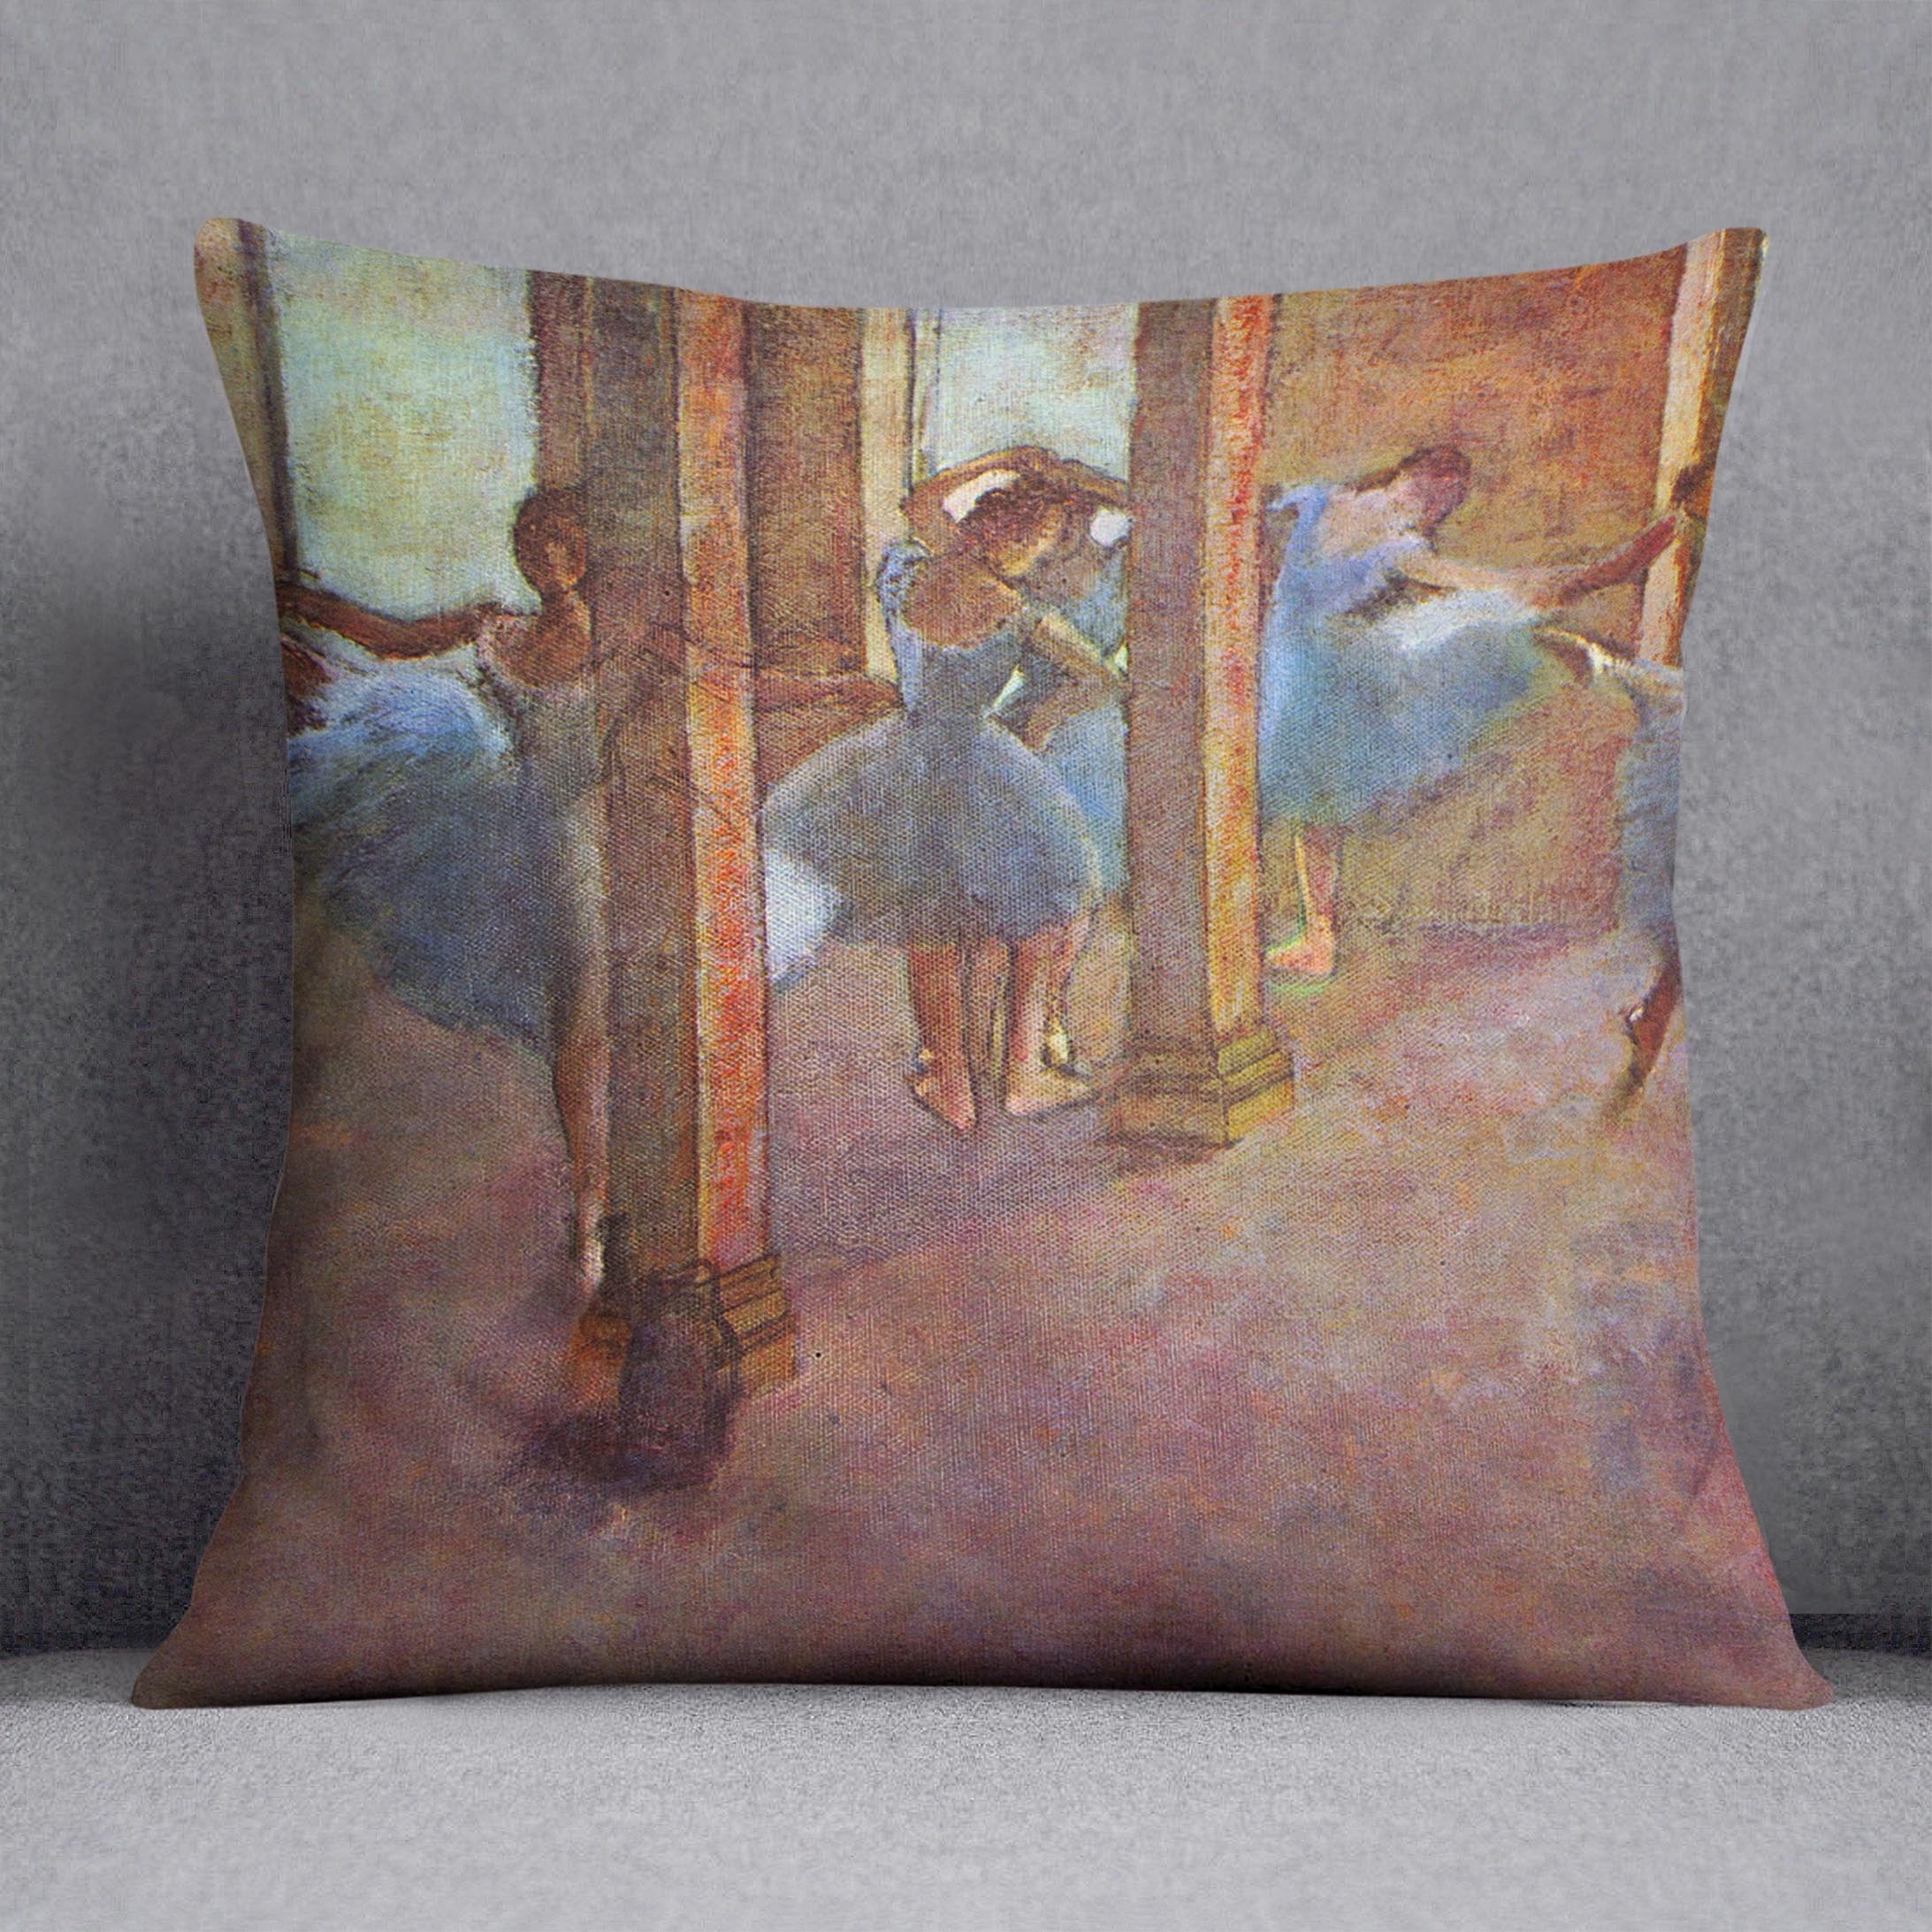 Dancers in the Foyer by Degas Cushion